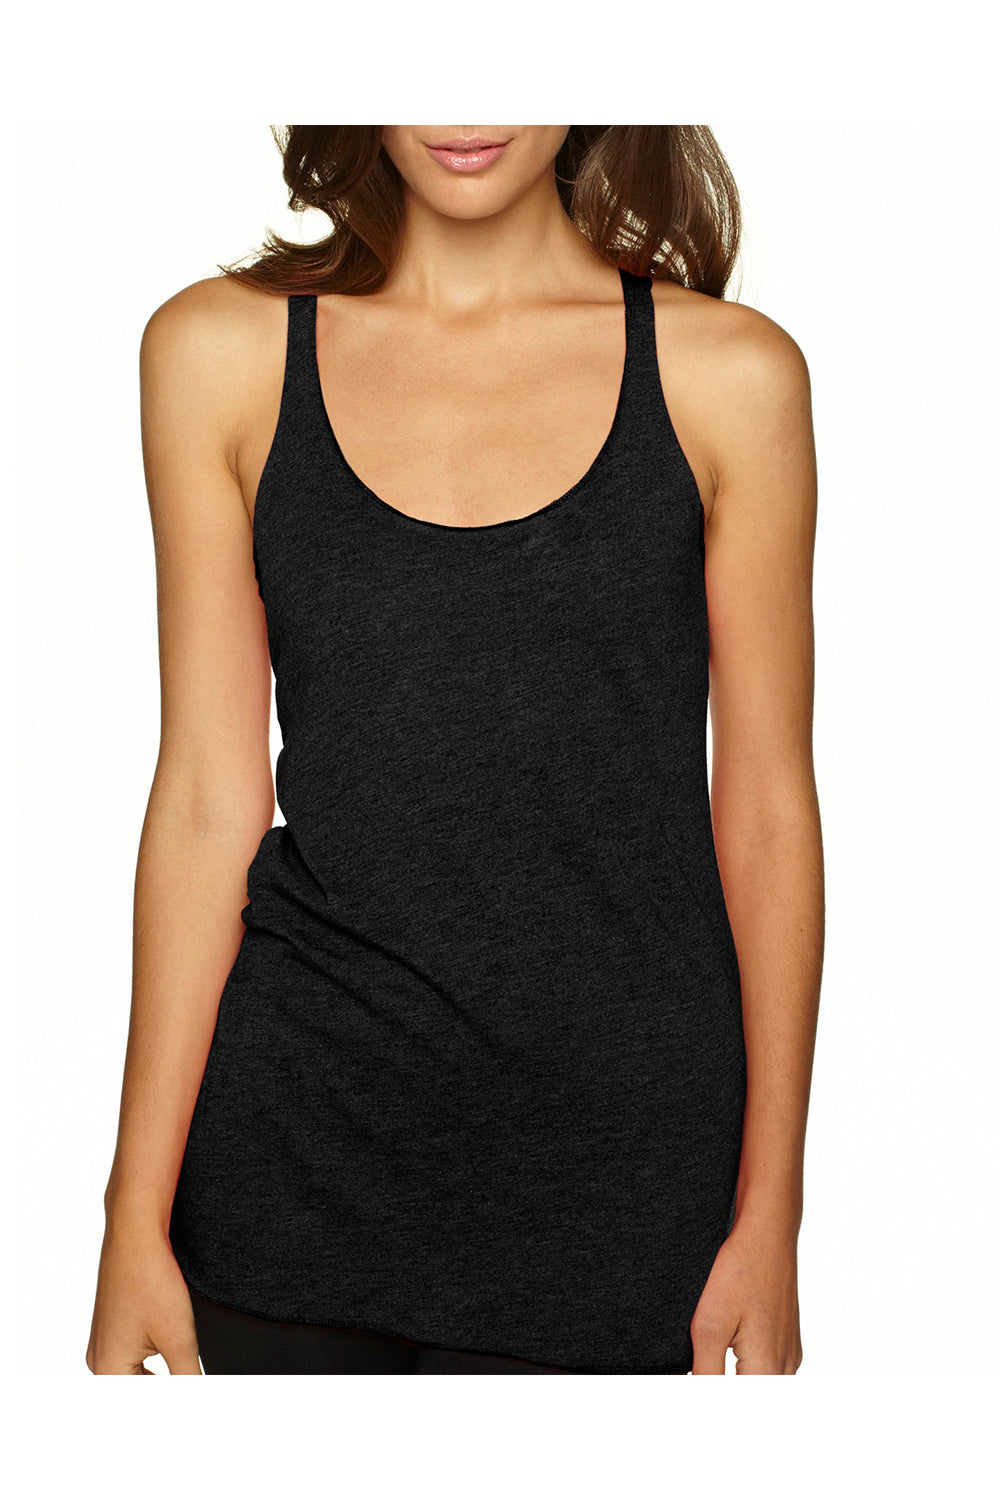 Next Level 6733 Womens Tank Top Black Front